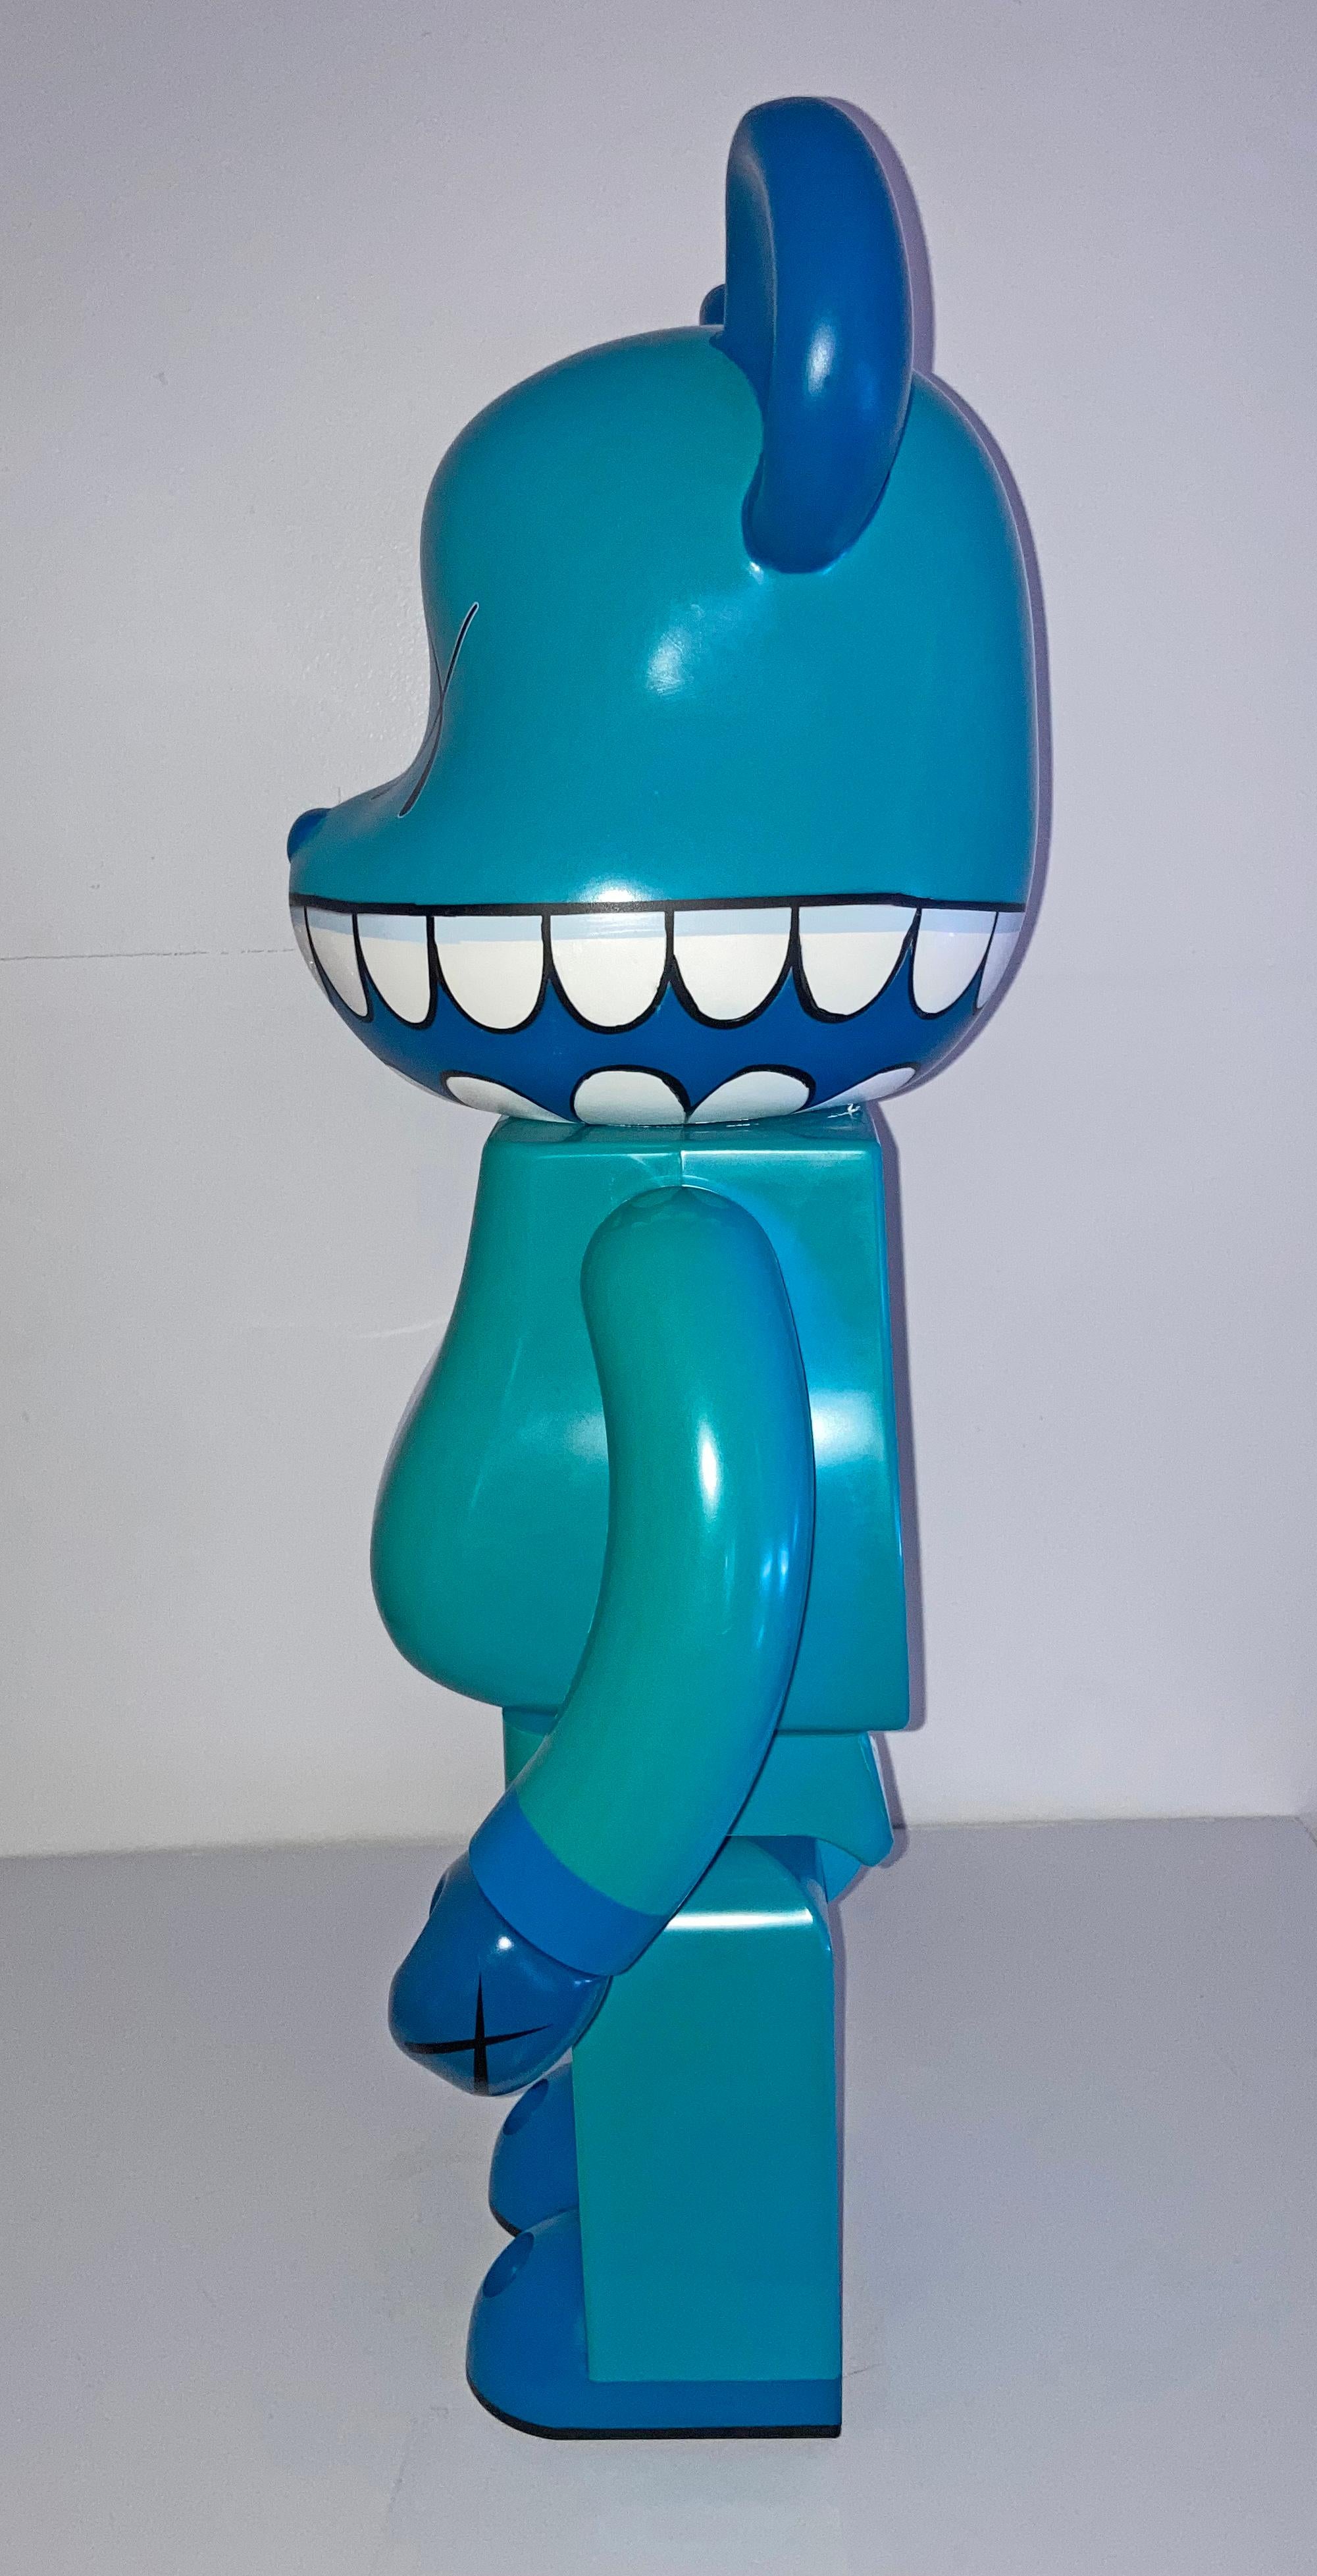 Chomper Bearbrick 1000% - Contemporary Sculpture by KAWS